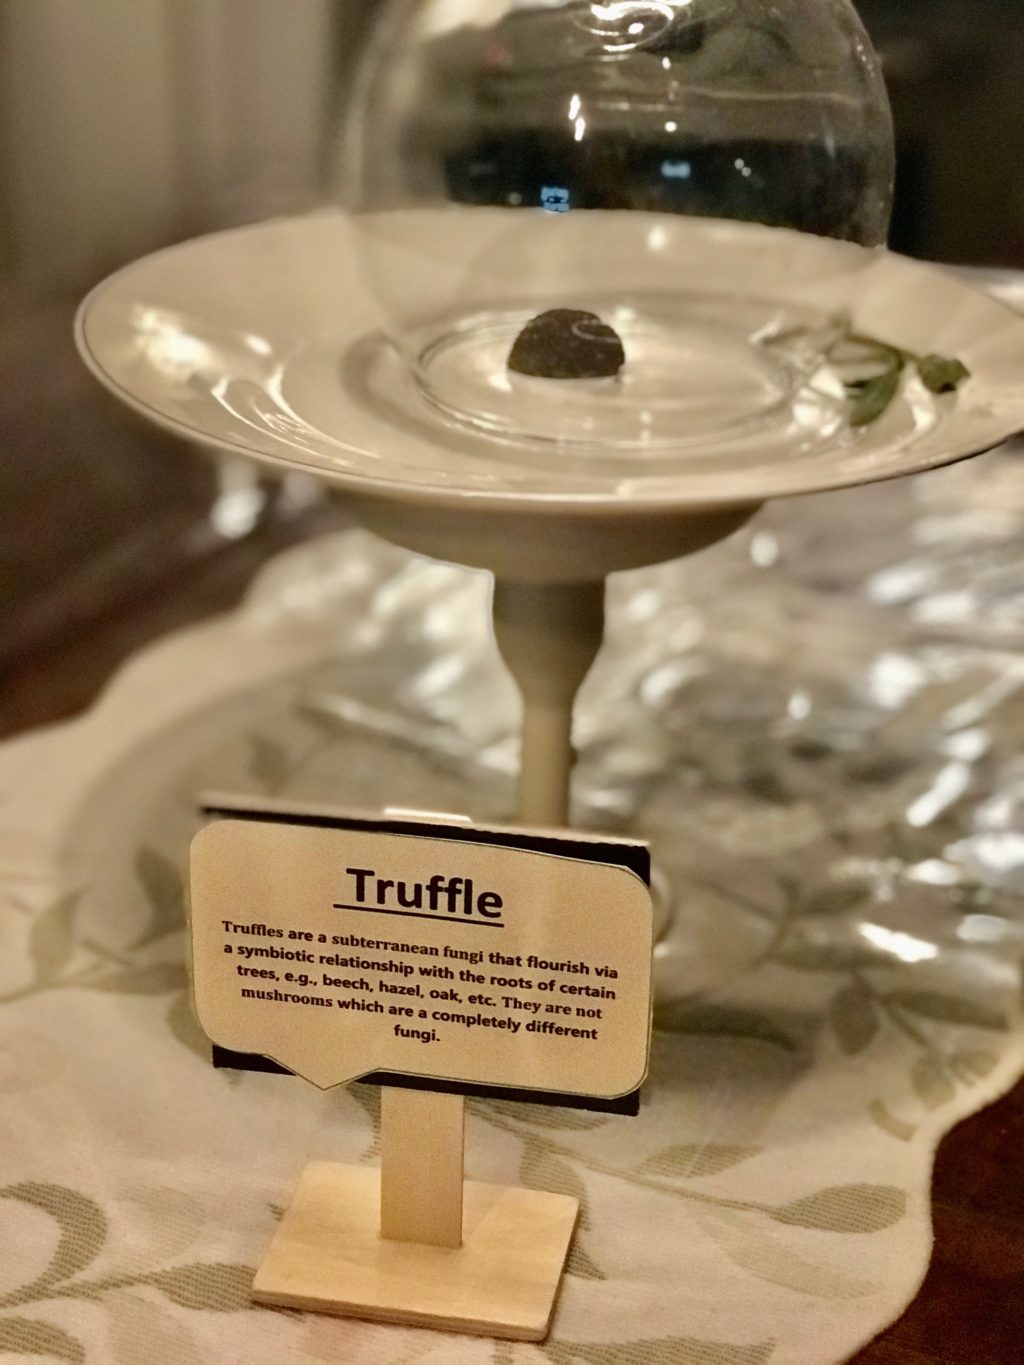 Truffle is a fungal tuber from Burgundy, France